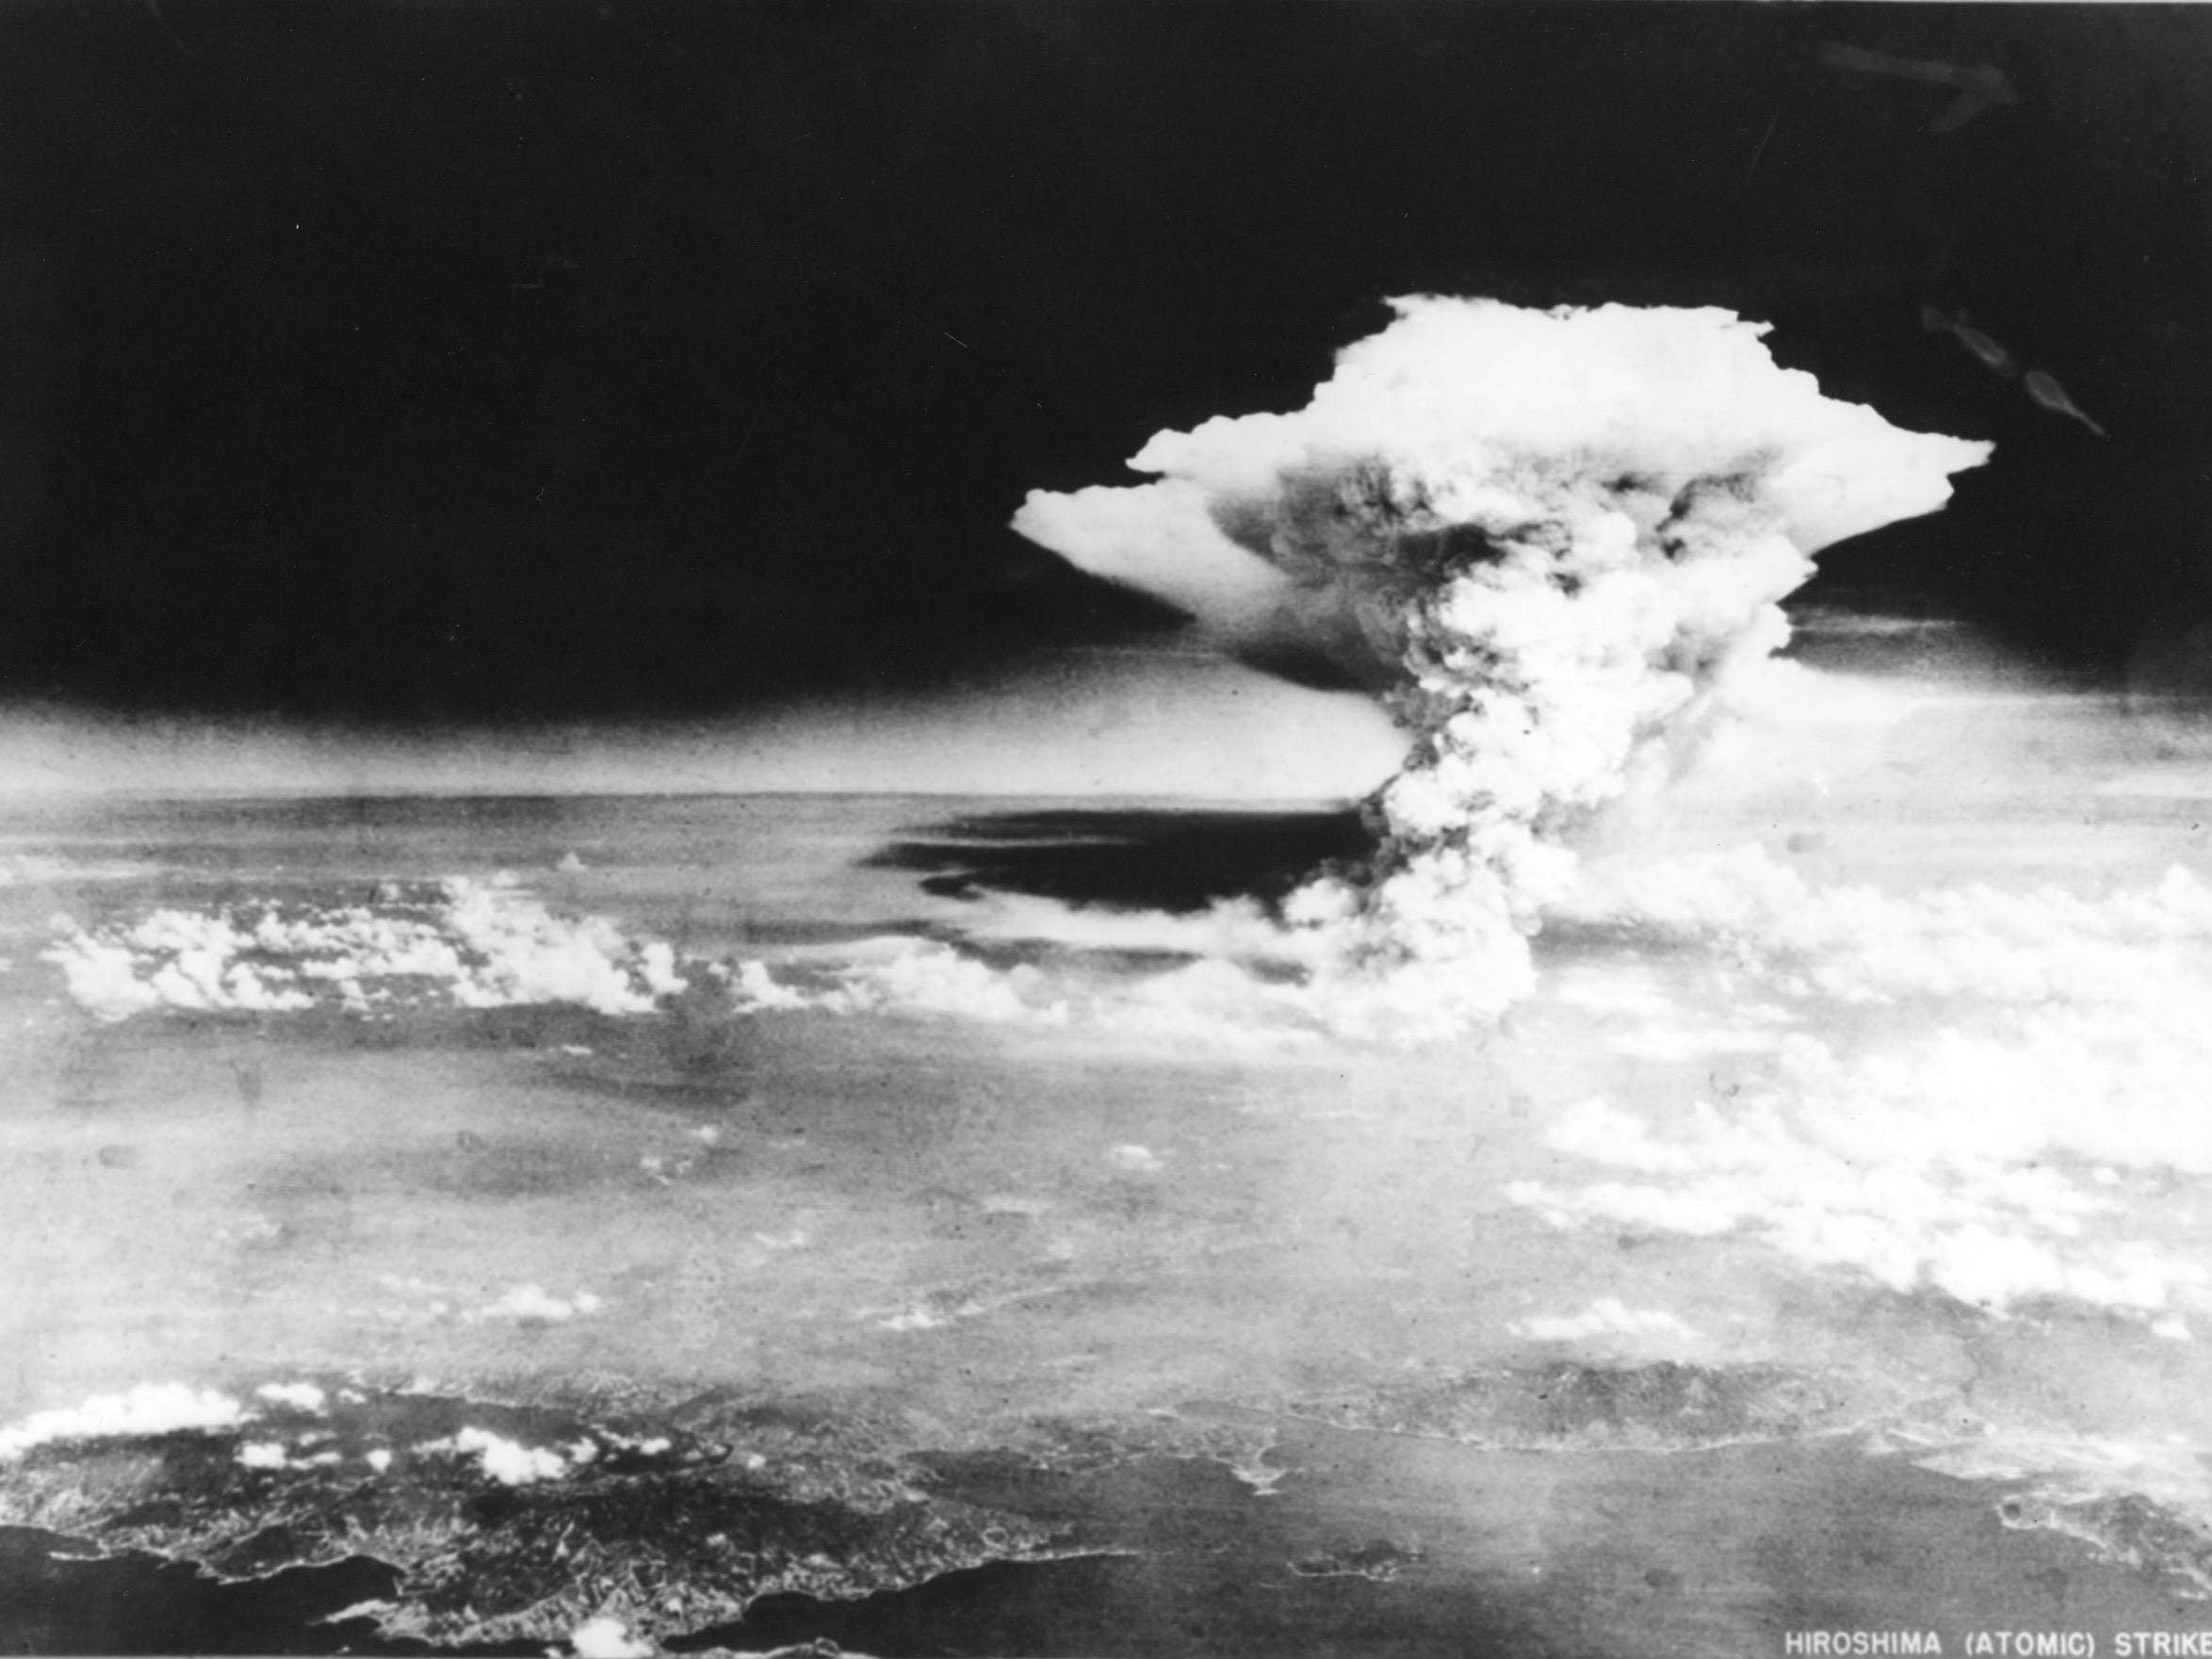 Photograph taken on 6 August 1945 by the US Army and released via the Hiroshima Peace Memorial Museum shows a mushroom cloud caused by the atomic bomb dropped by the B-29 bomber Enola Gay over the city of Hiroshima